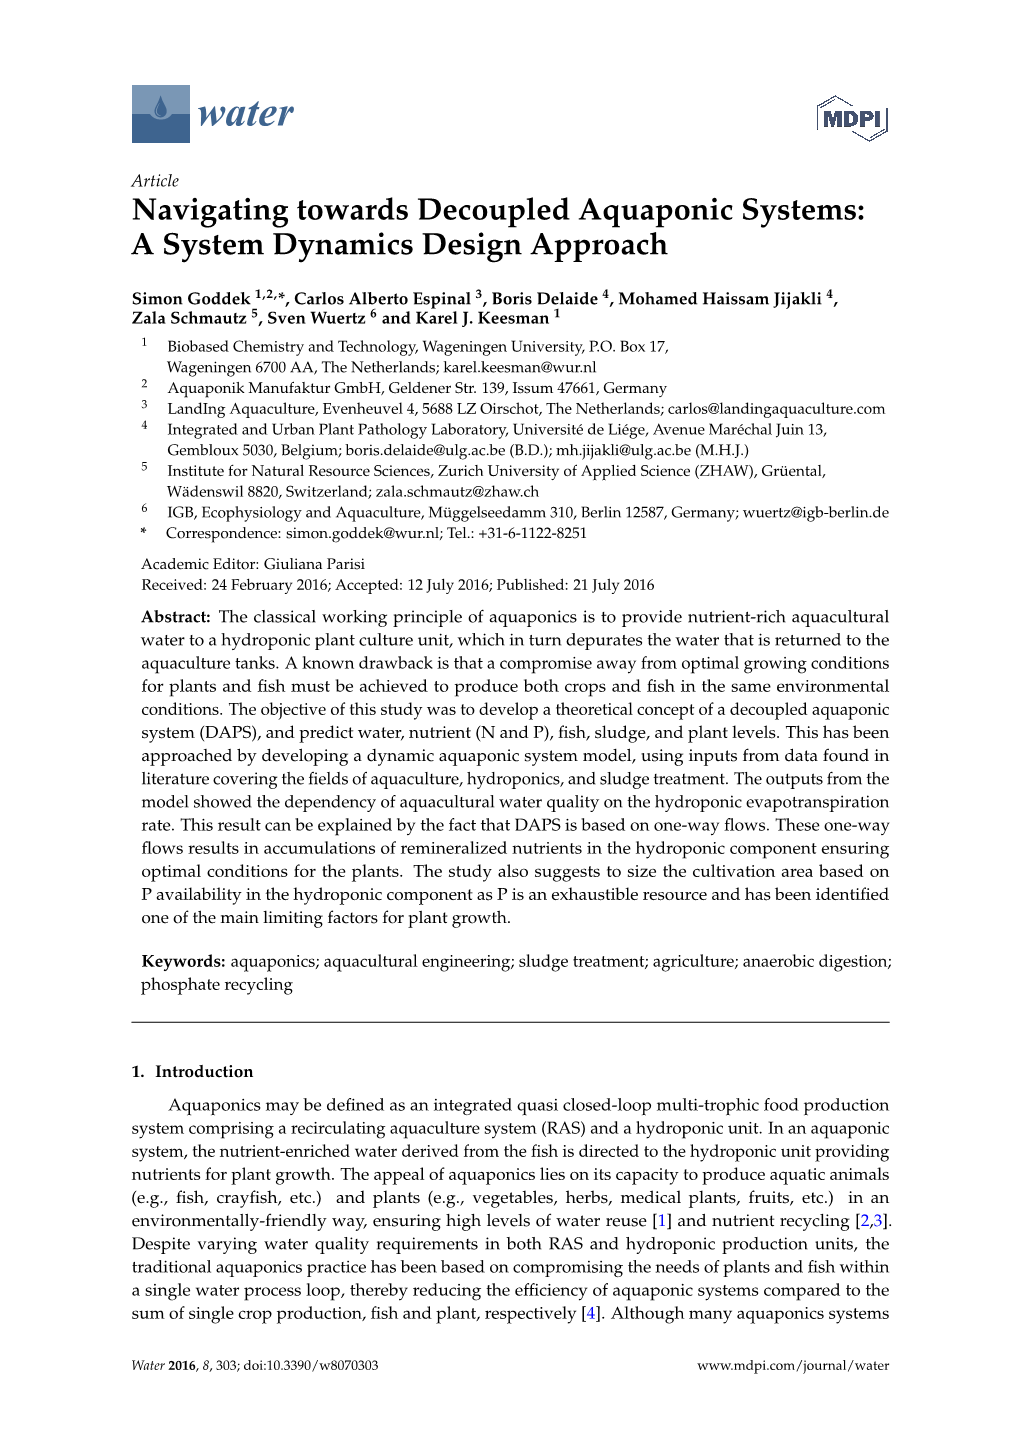 Navigating Towards Decoupled Aquaponic Systems: a System Dynamics Design Approach